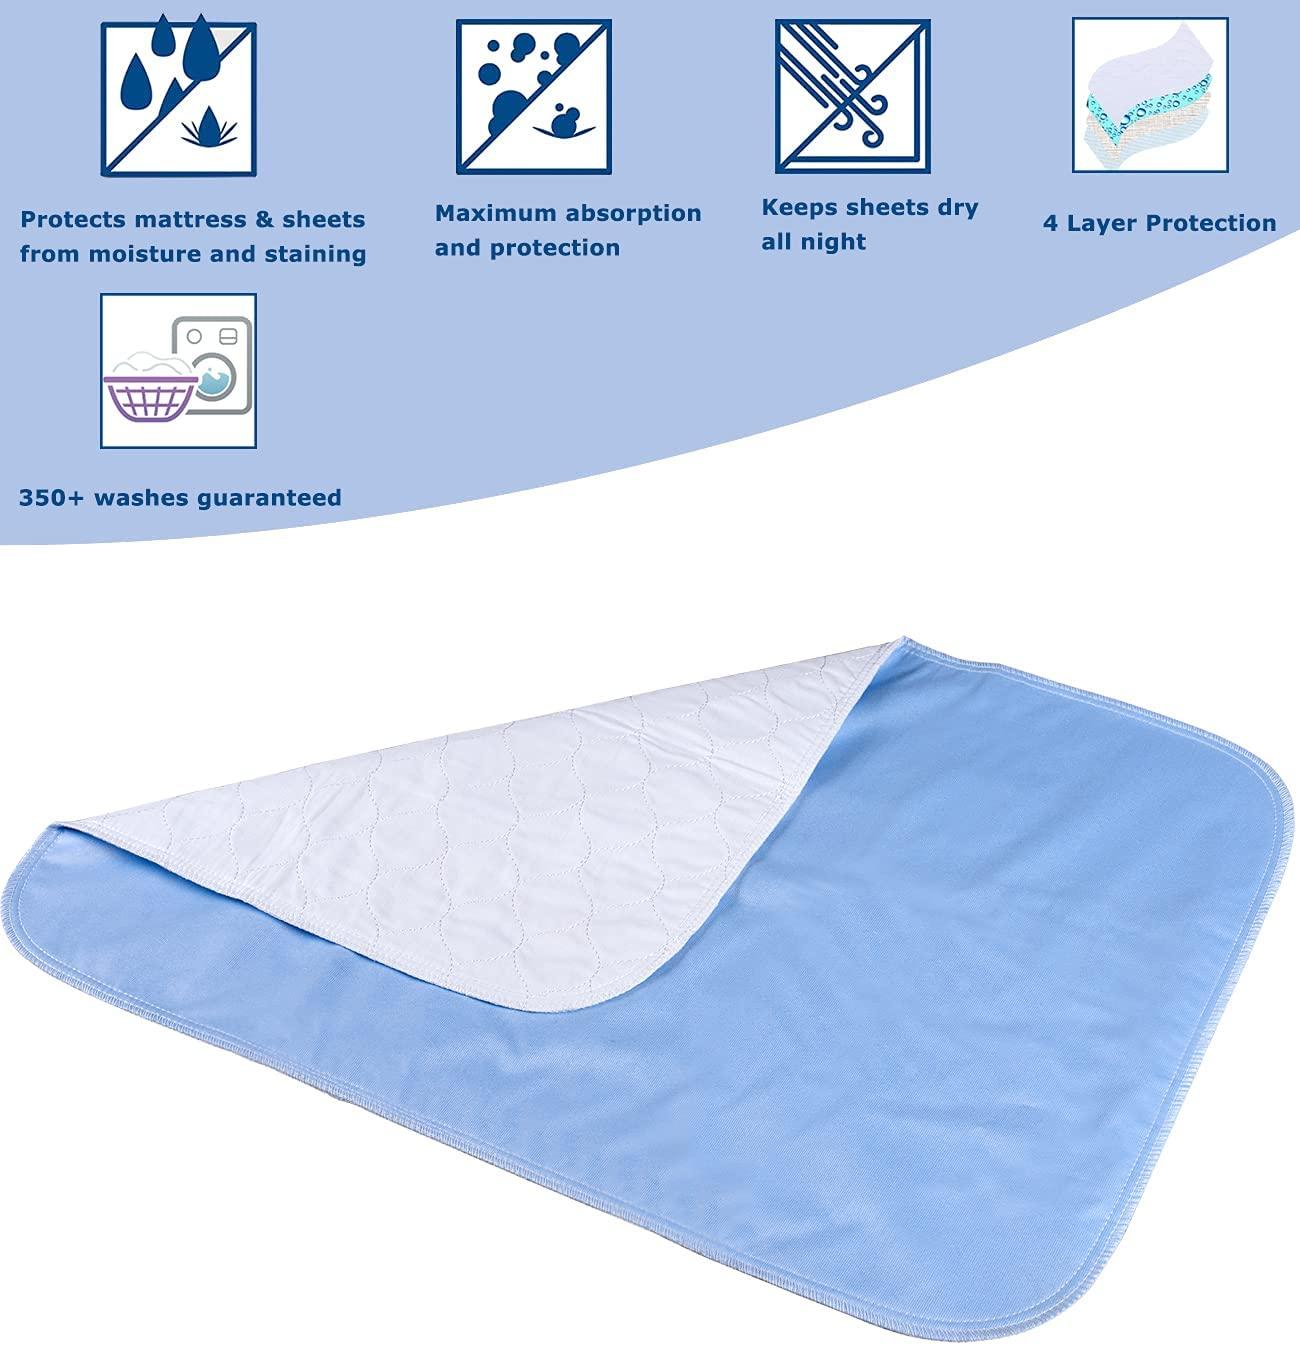 Washable Incontinence Bed Pads (72 x 36) for Adults, Kids, Dogs  Waterproof and Machine Washable Large Sheet Protector with 10 Cup Absorbency